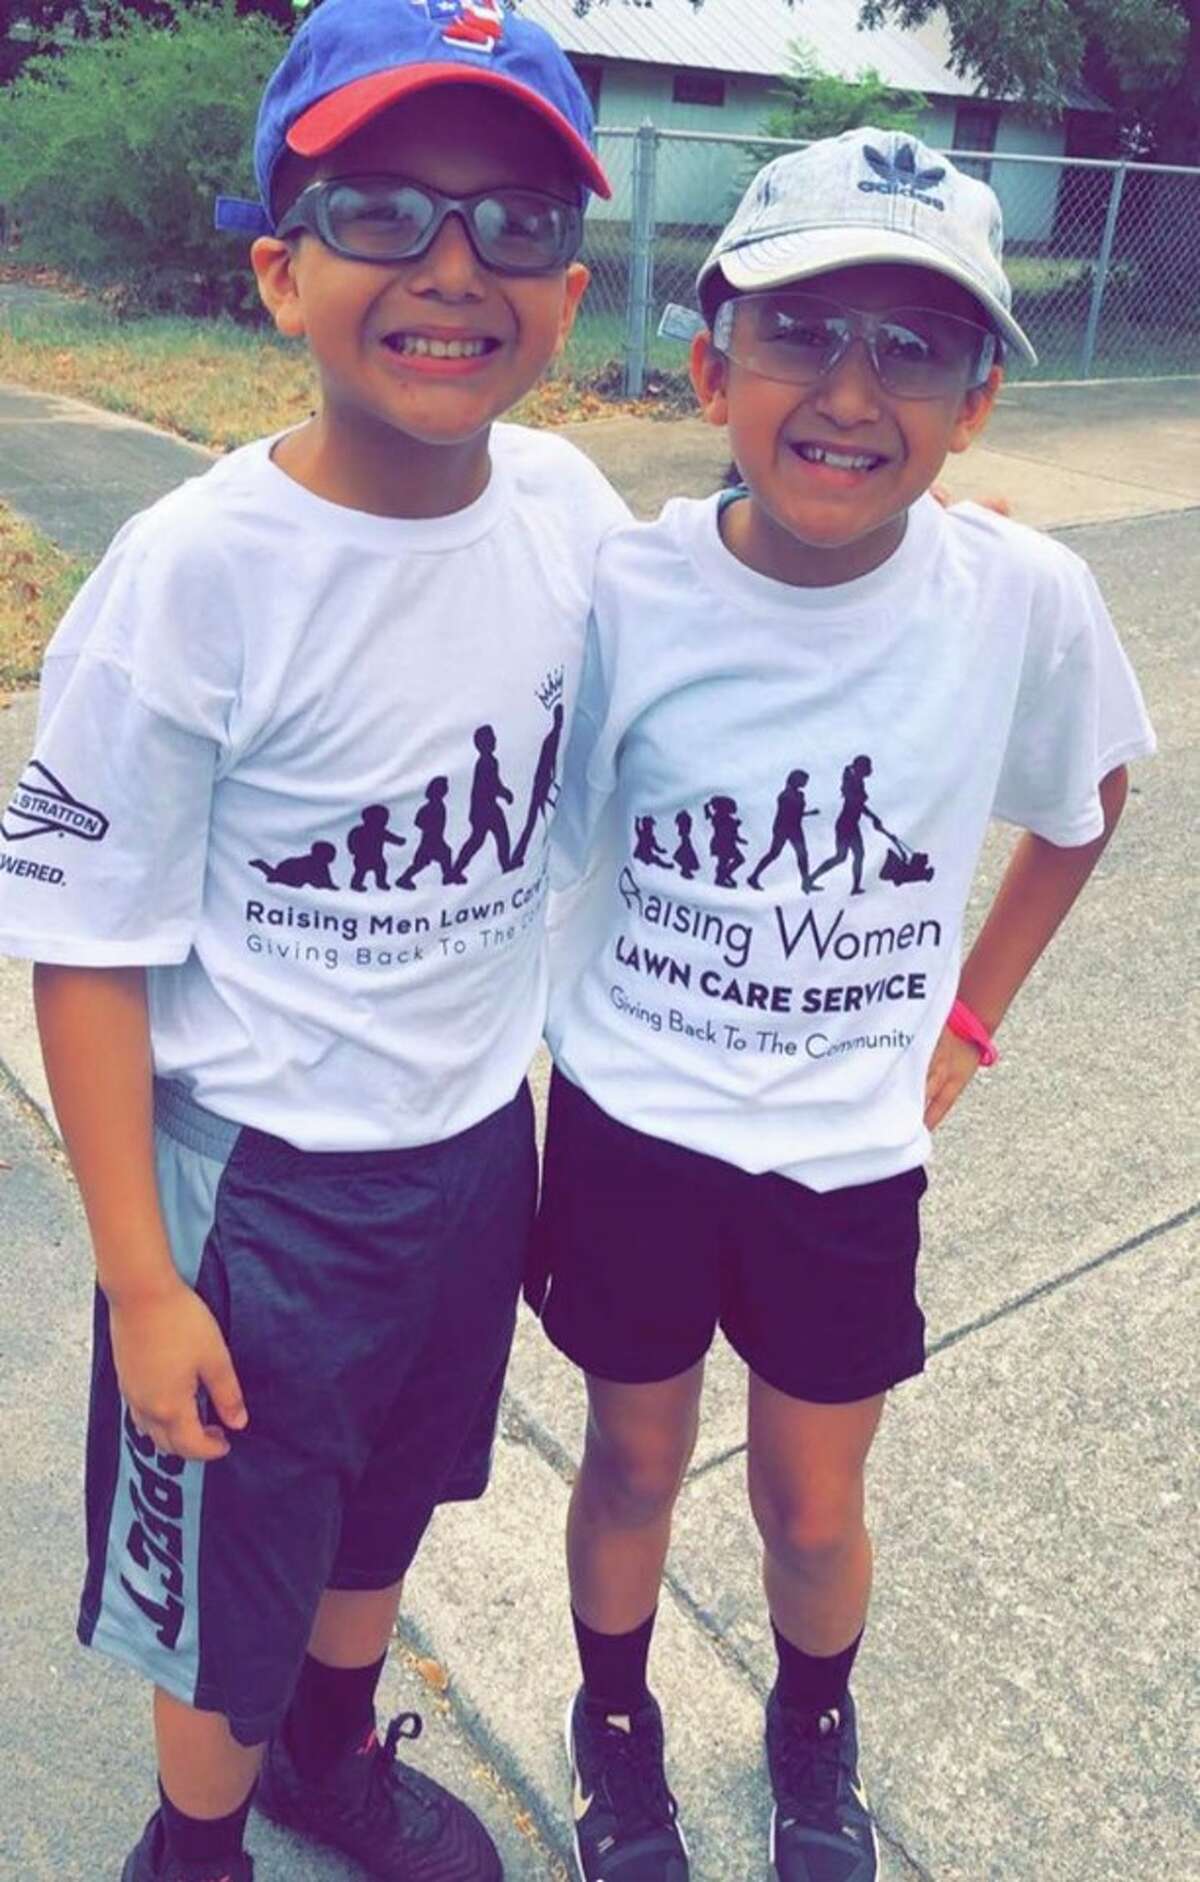 Meet brother-sister duo Nathan and Zoe, 12 and 10, respectively. They recently accepted the nationwide 50 Yard Challenge created by Rodney Smith Jr., the man who made headlines for his goal of cutting yards in all 50 states.